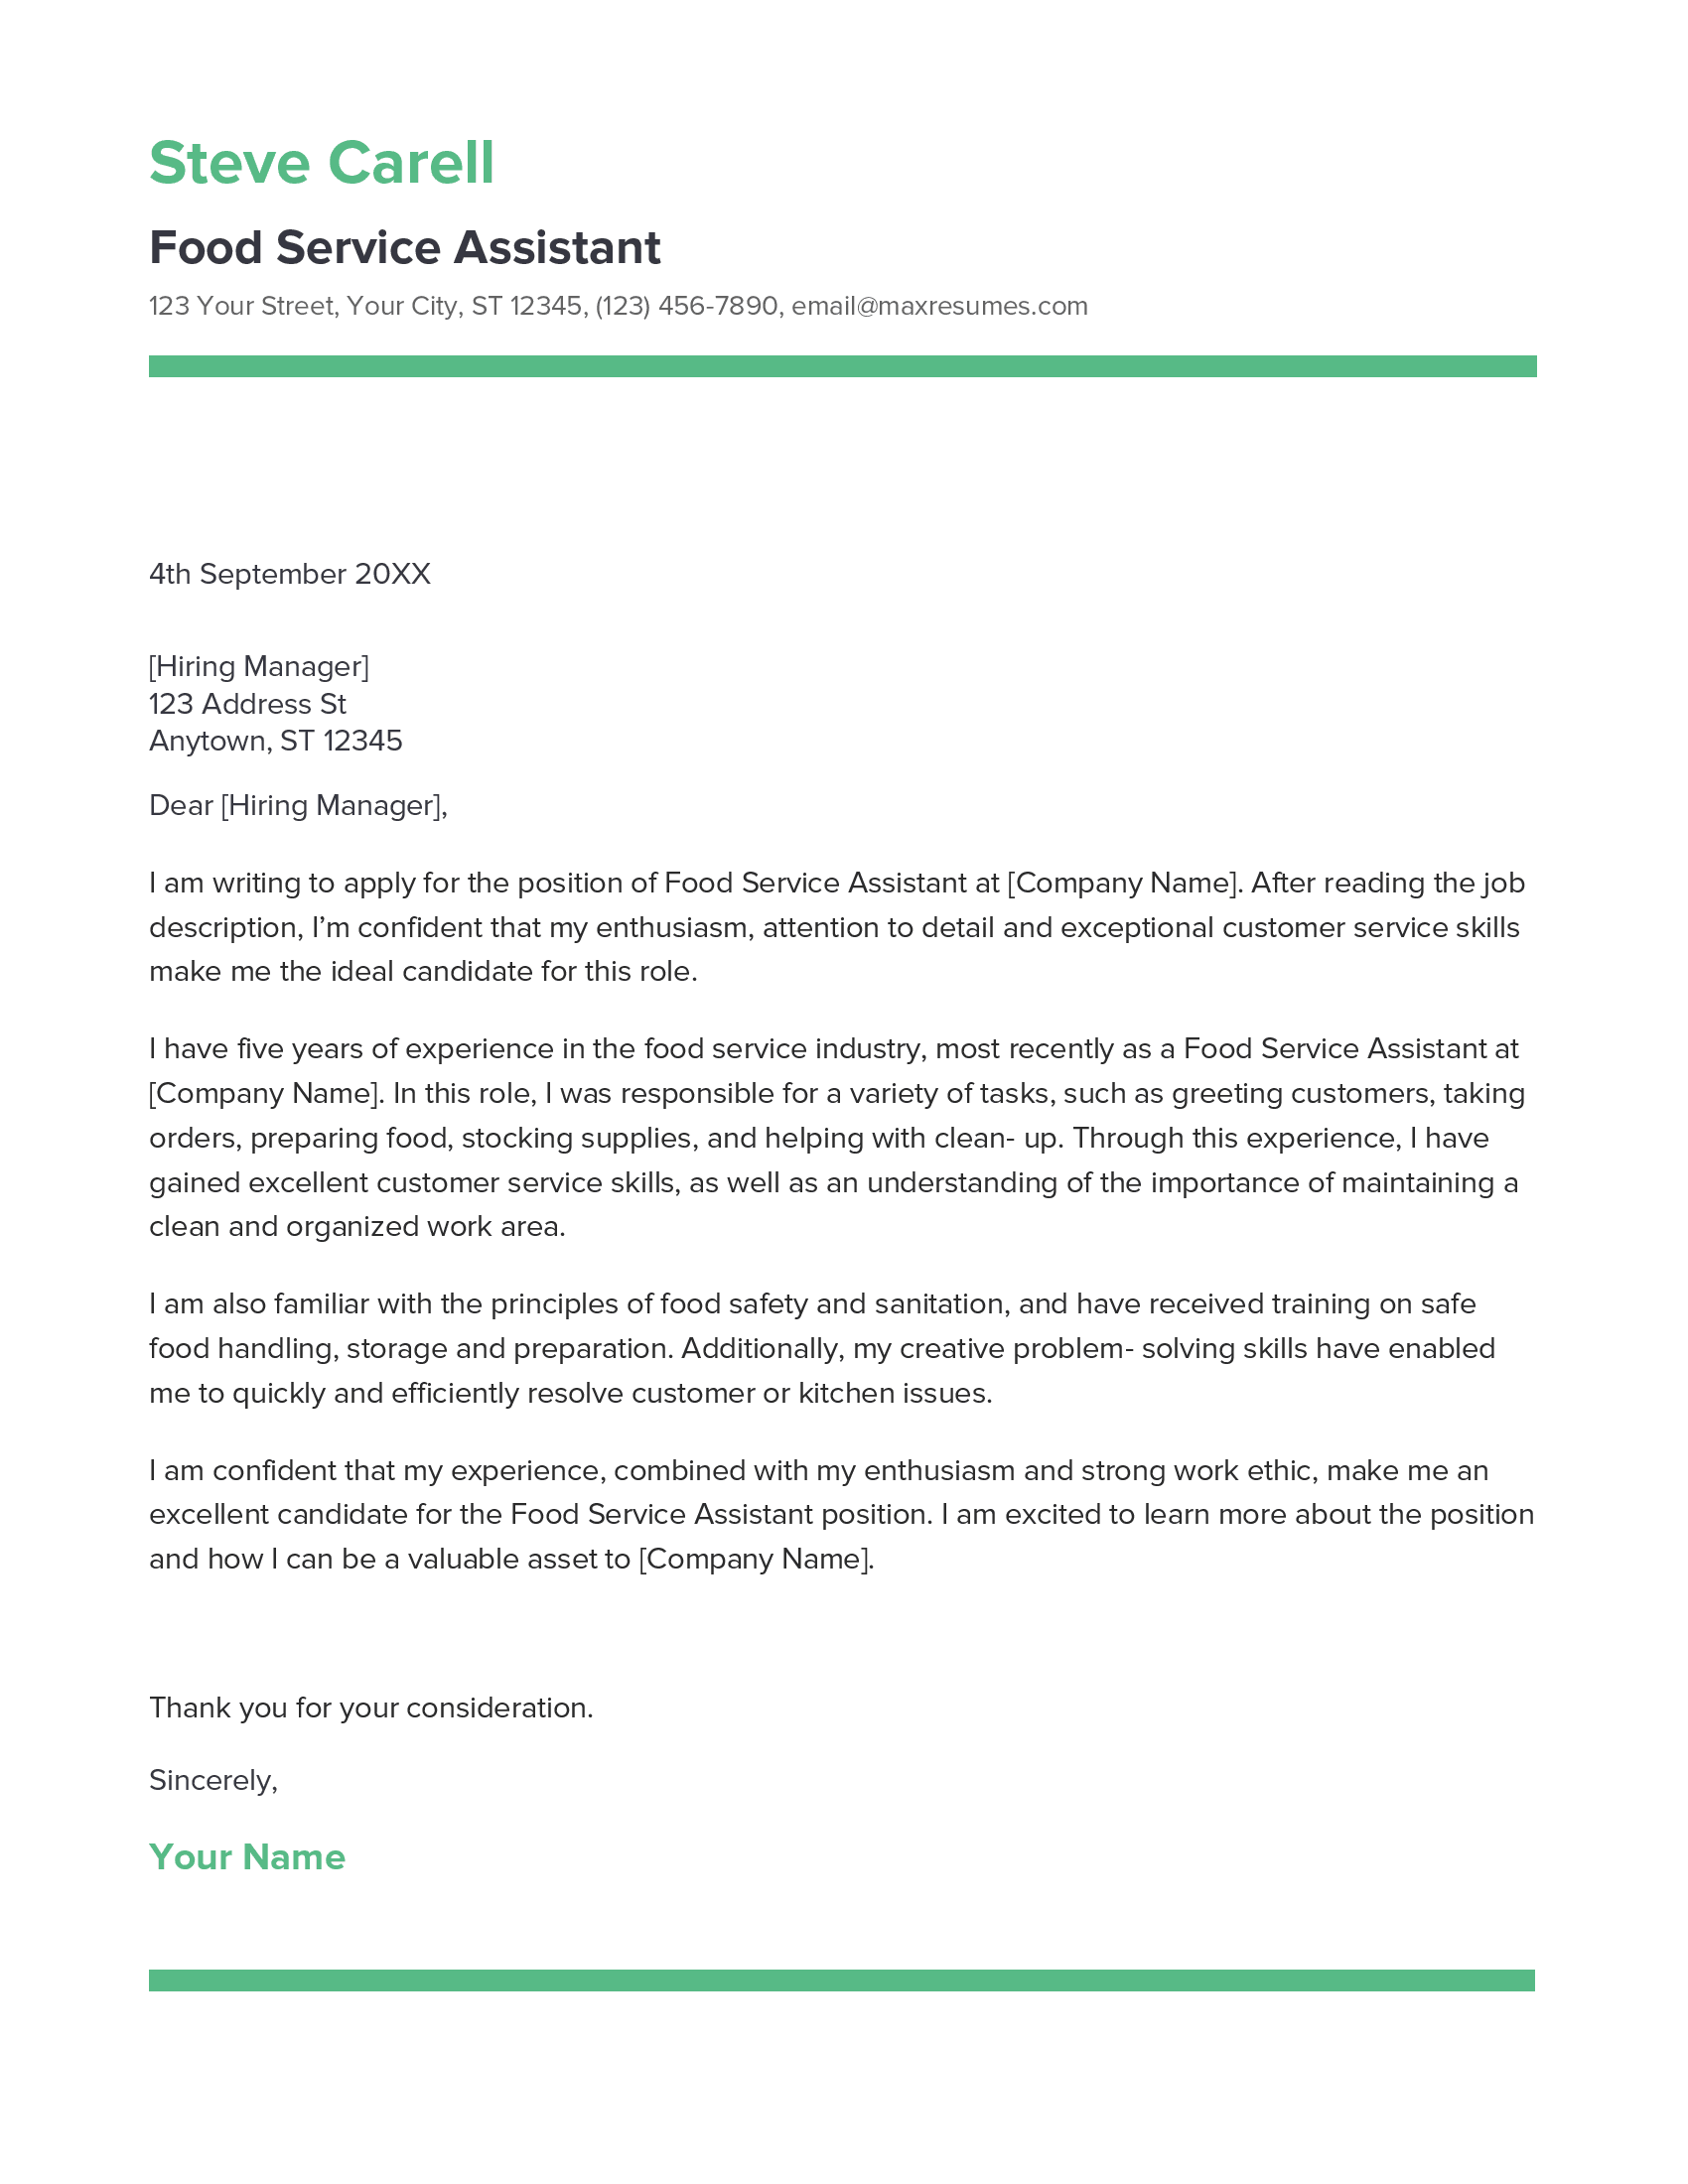 Food Service Assistant Cover Letter Example